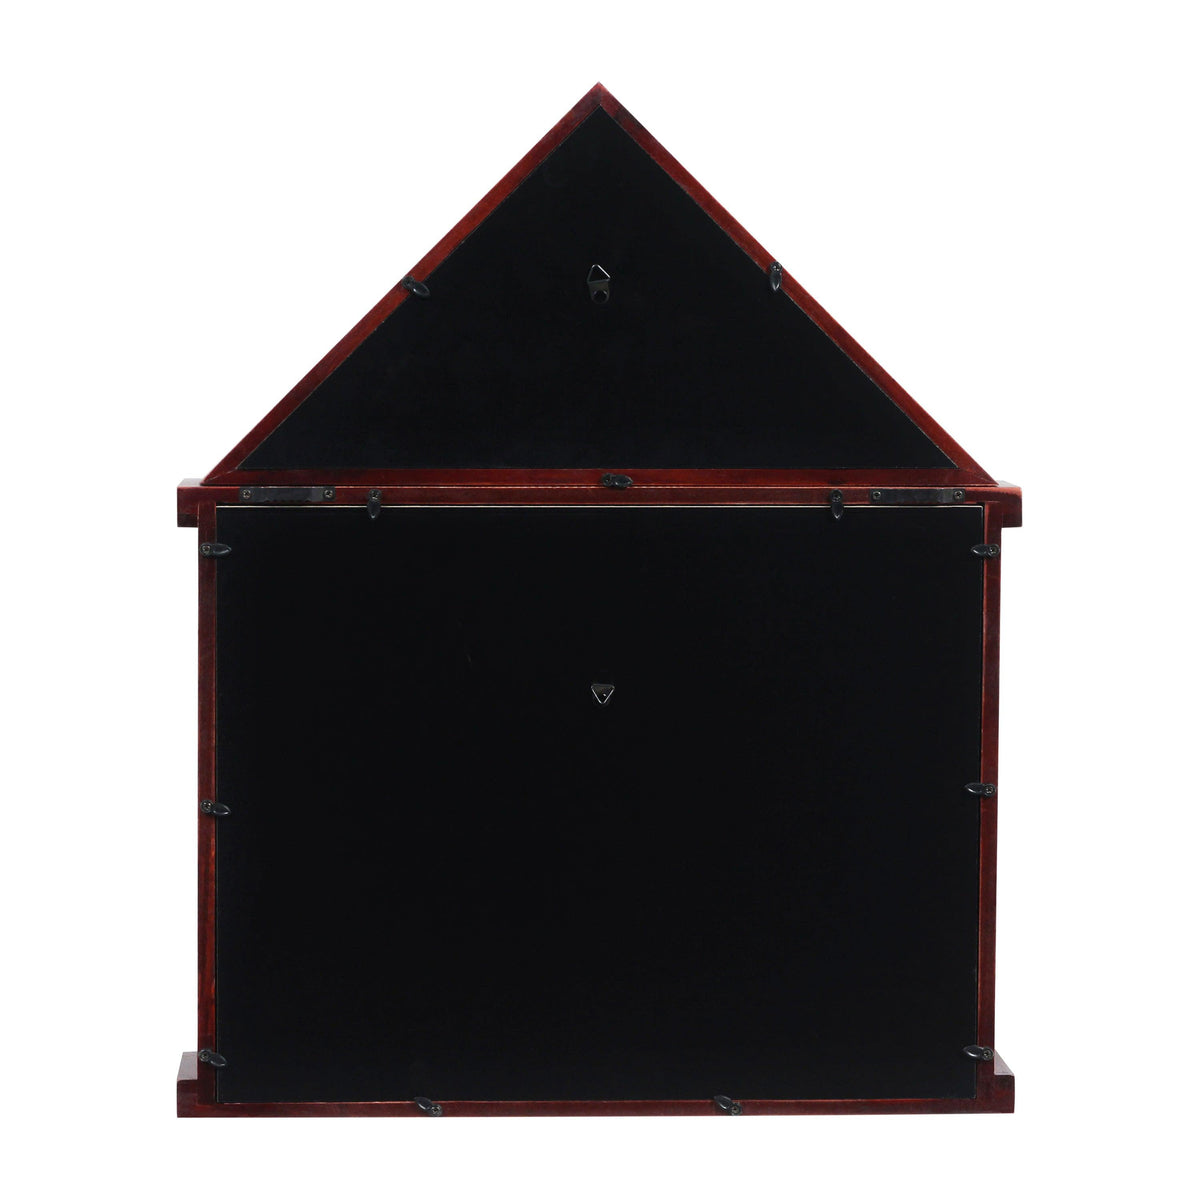 Mahogany,18.5"W x 3.5"D x 22.5"H |#| Glass Front Flag Display Case with Certificate Holder-Fits 3x5 Flag-Dark Brown